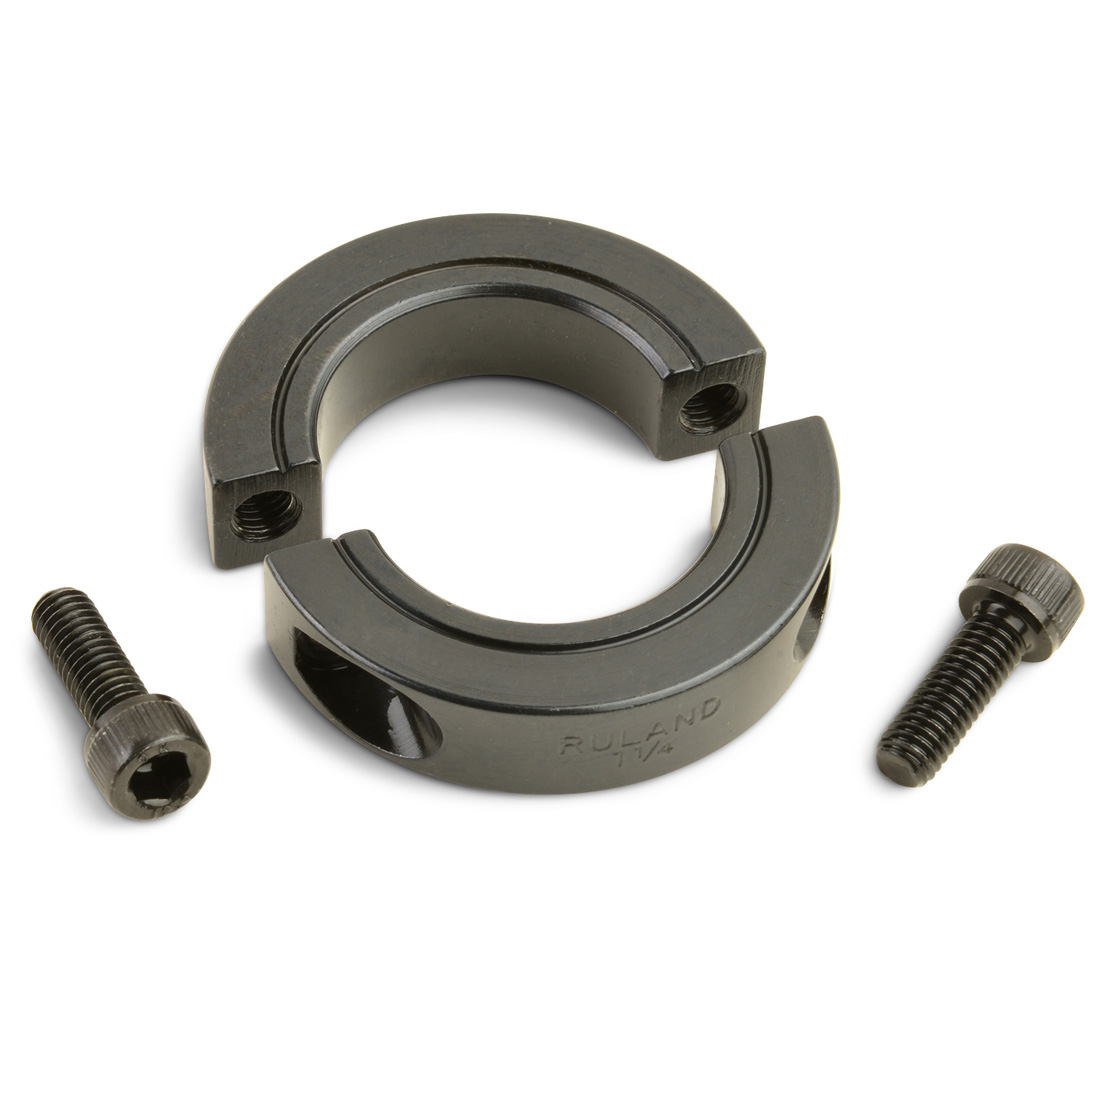 Pack of 2 Ruland SP-20-A Two-Piece Clamping Shaft Collar Aluminum 2 1/16 OD 1/2 Width 1.250 Bore 